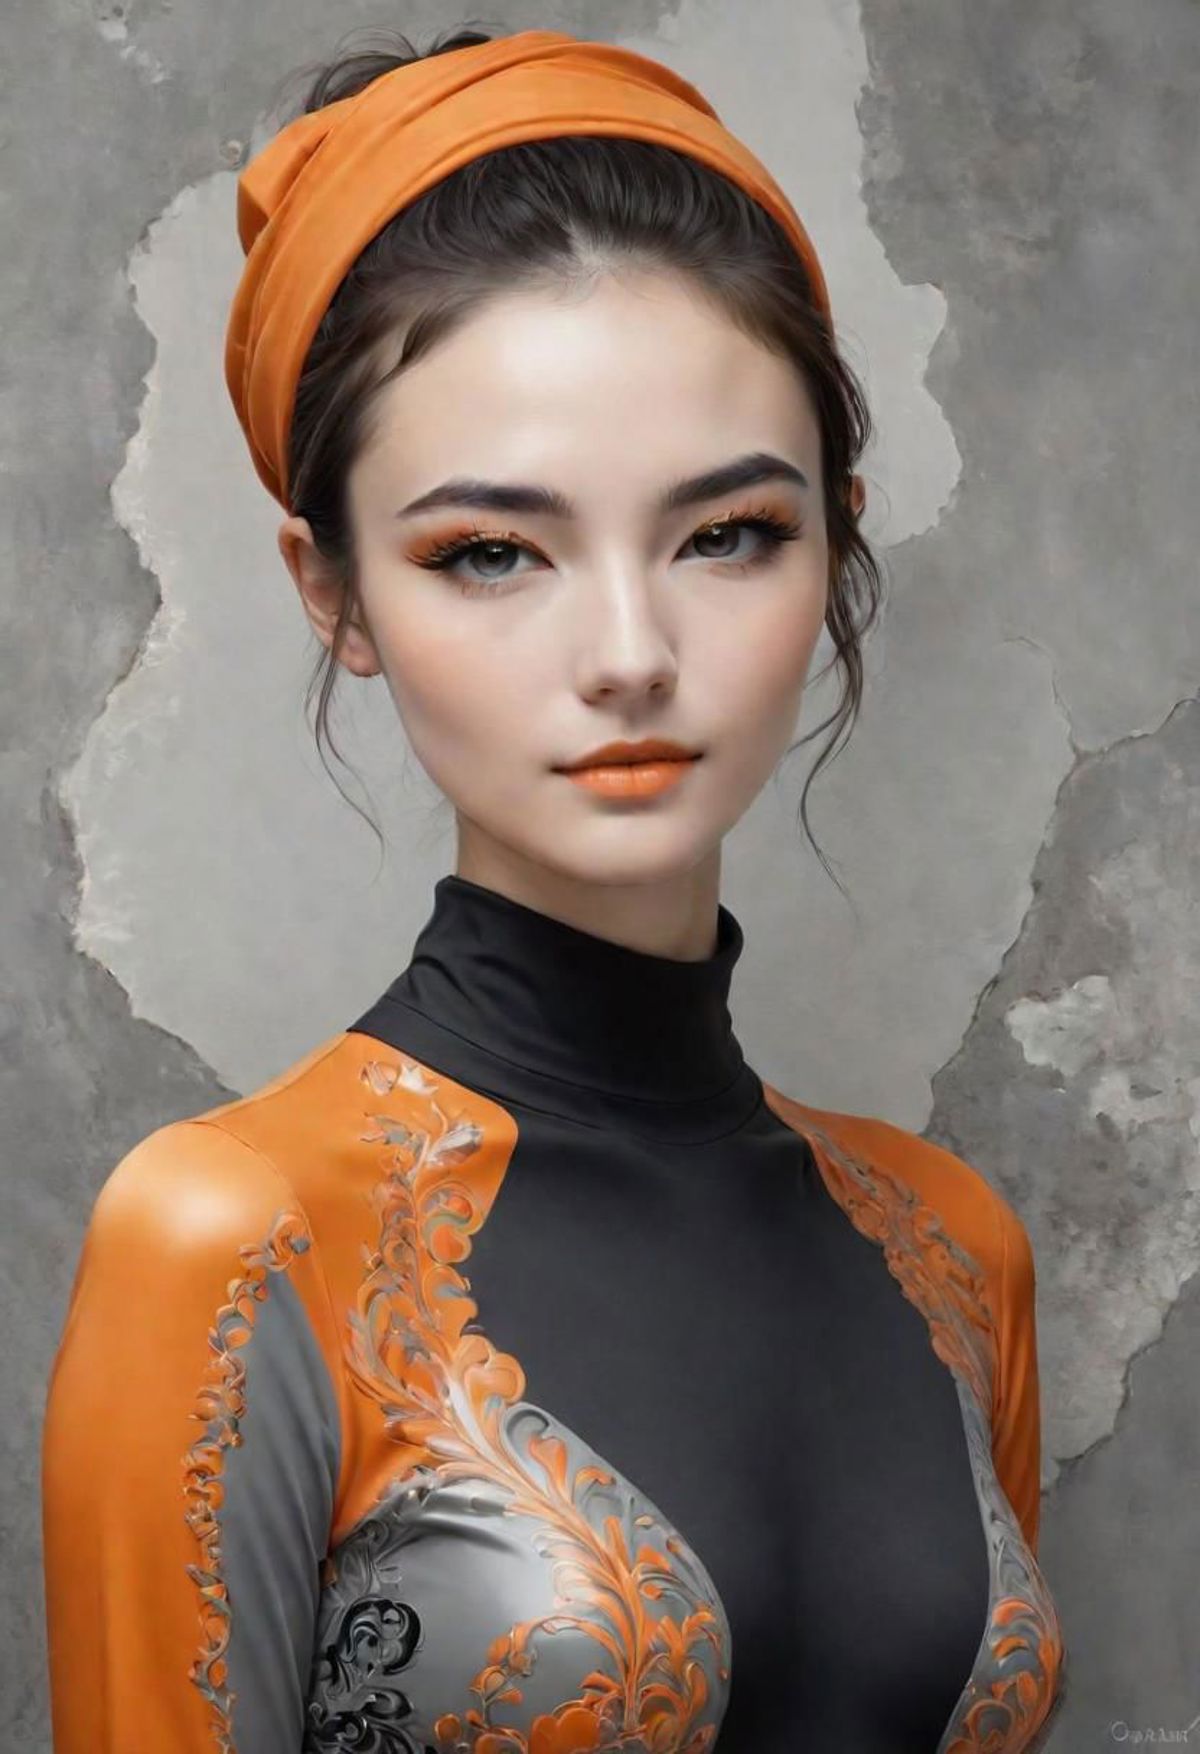 Woman wearing a black and gold outfit with orange makeup.